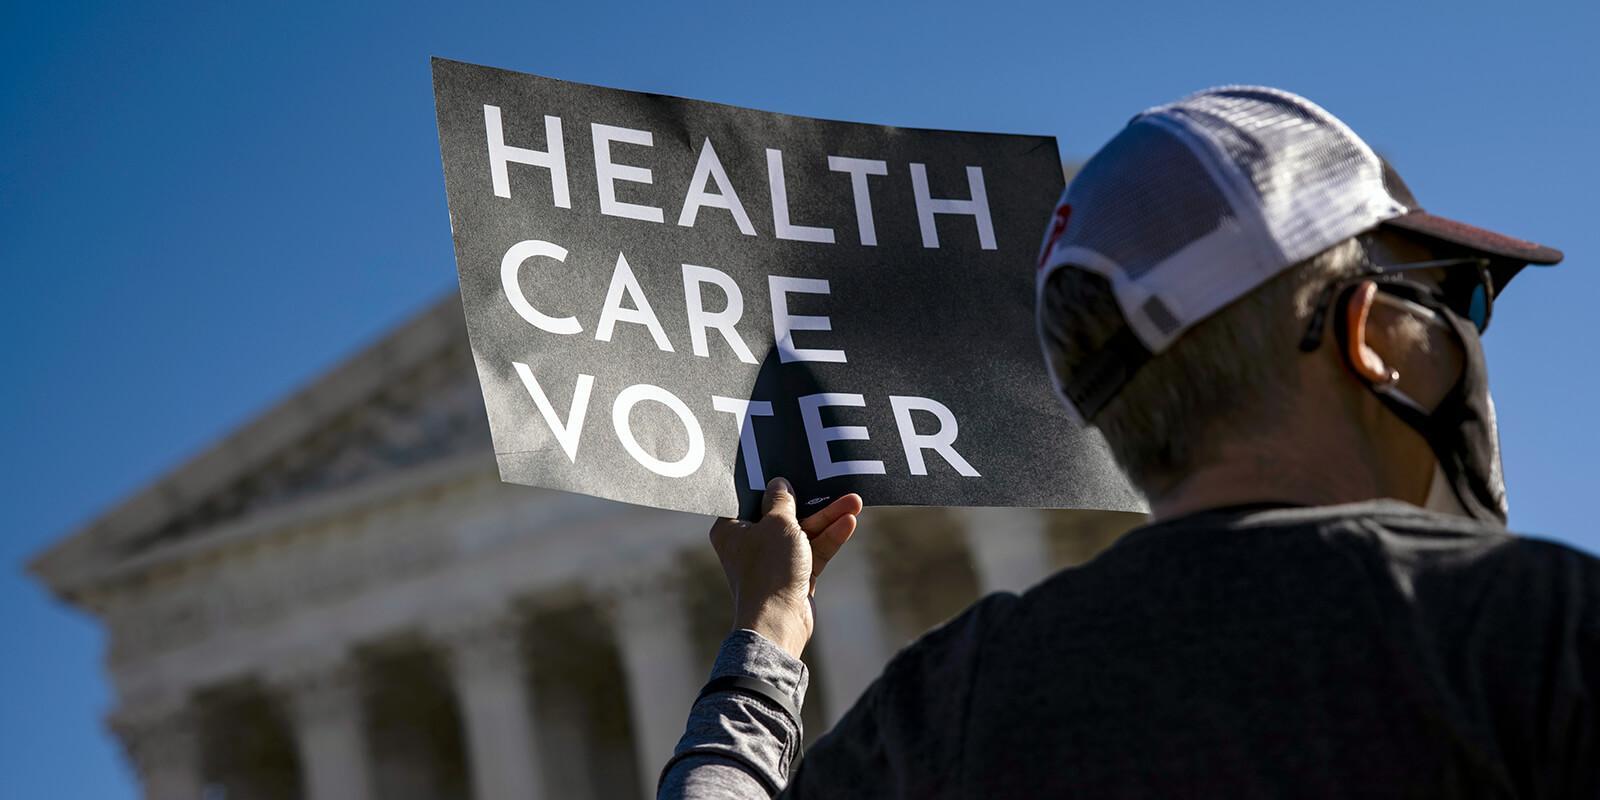 Health care voter holding up a sign